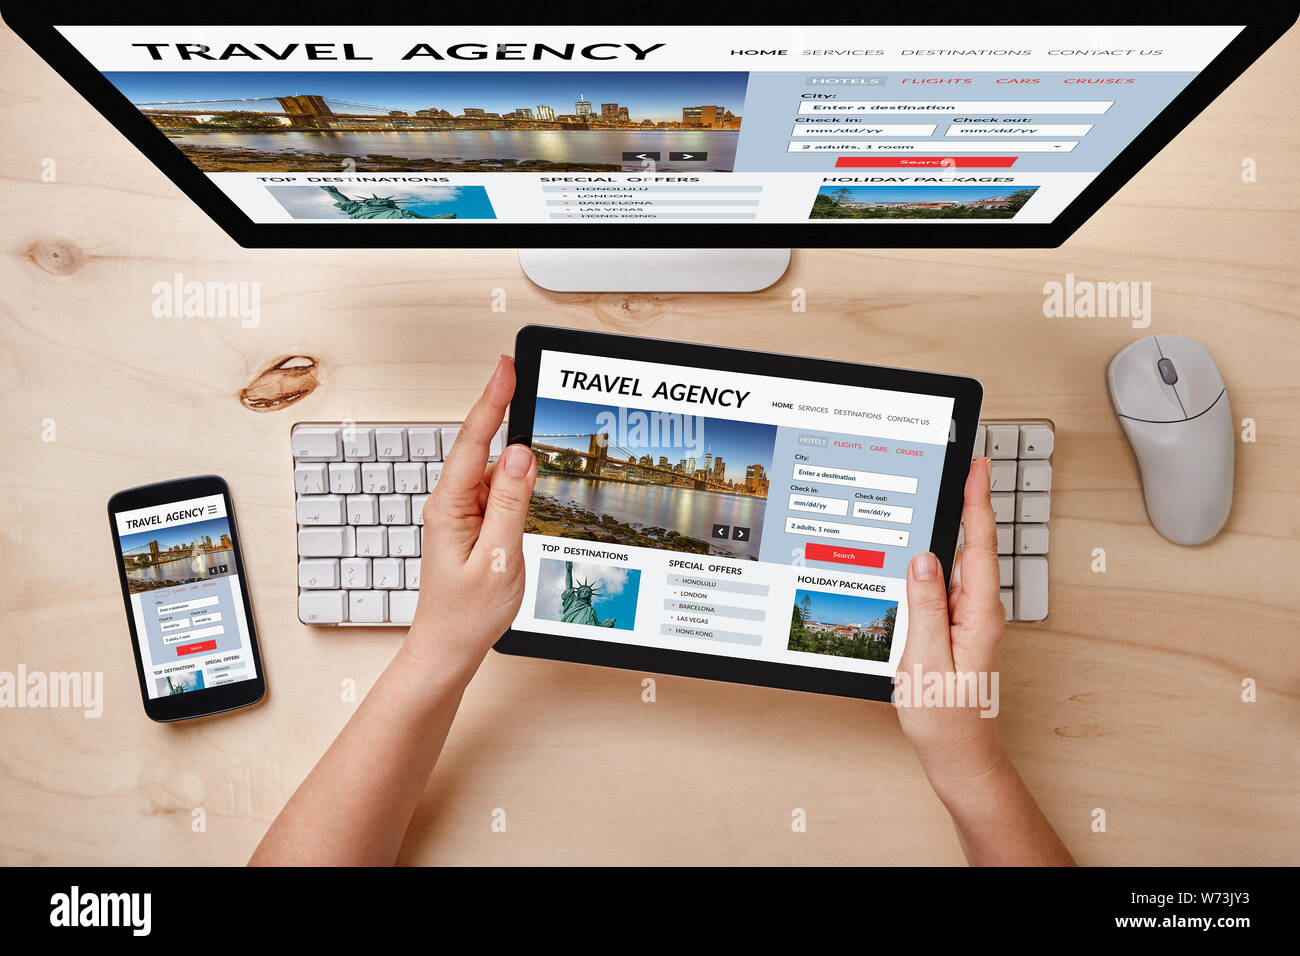 Travel agency concept on computer, tablet and smartphone screen over wooden table. Top view of responsive devices. Stock Photo